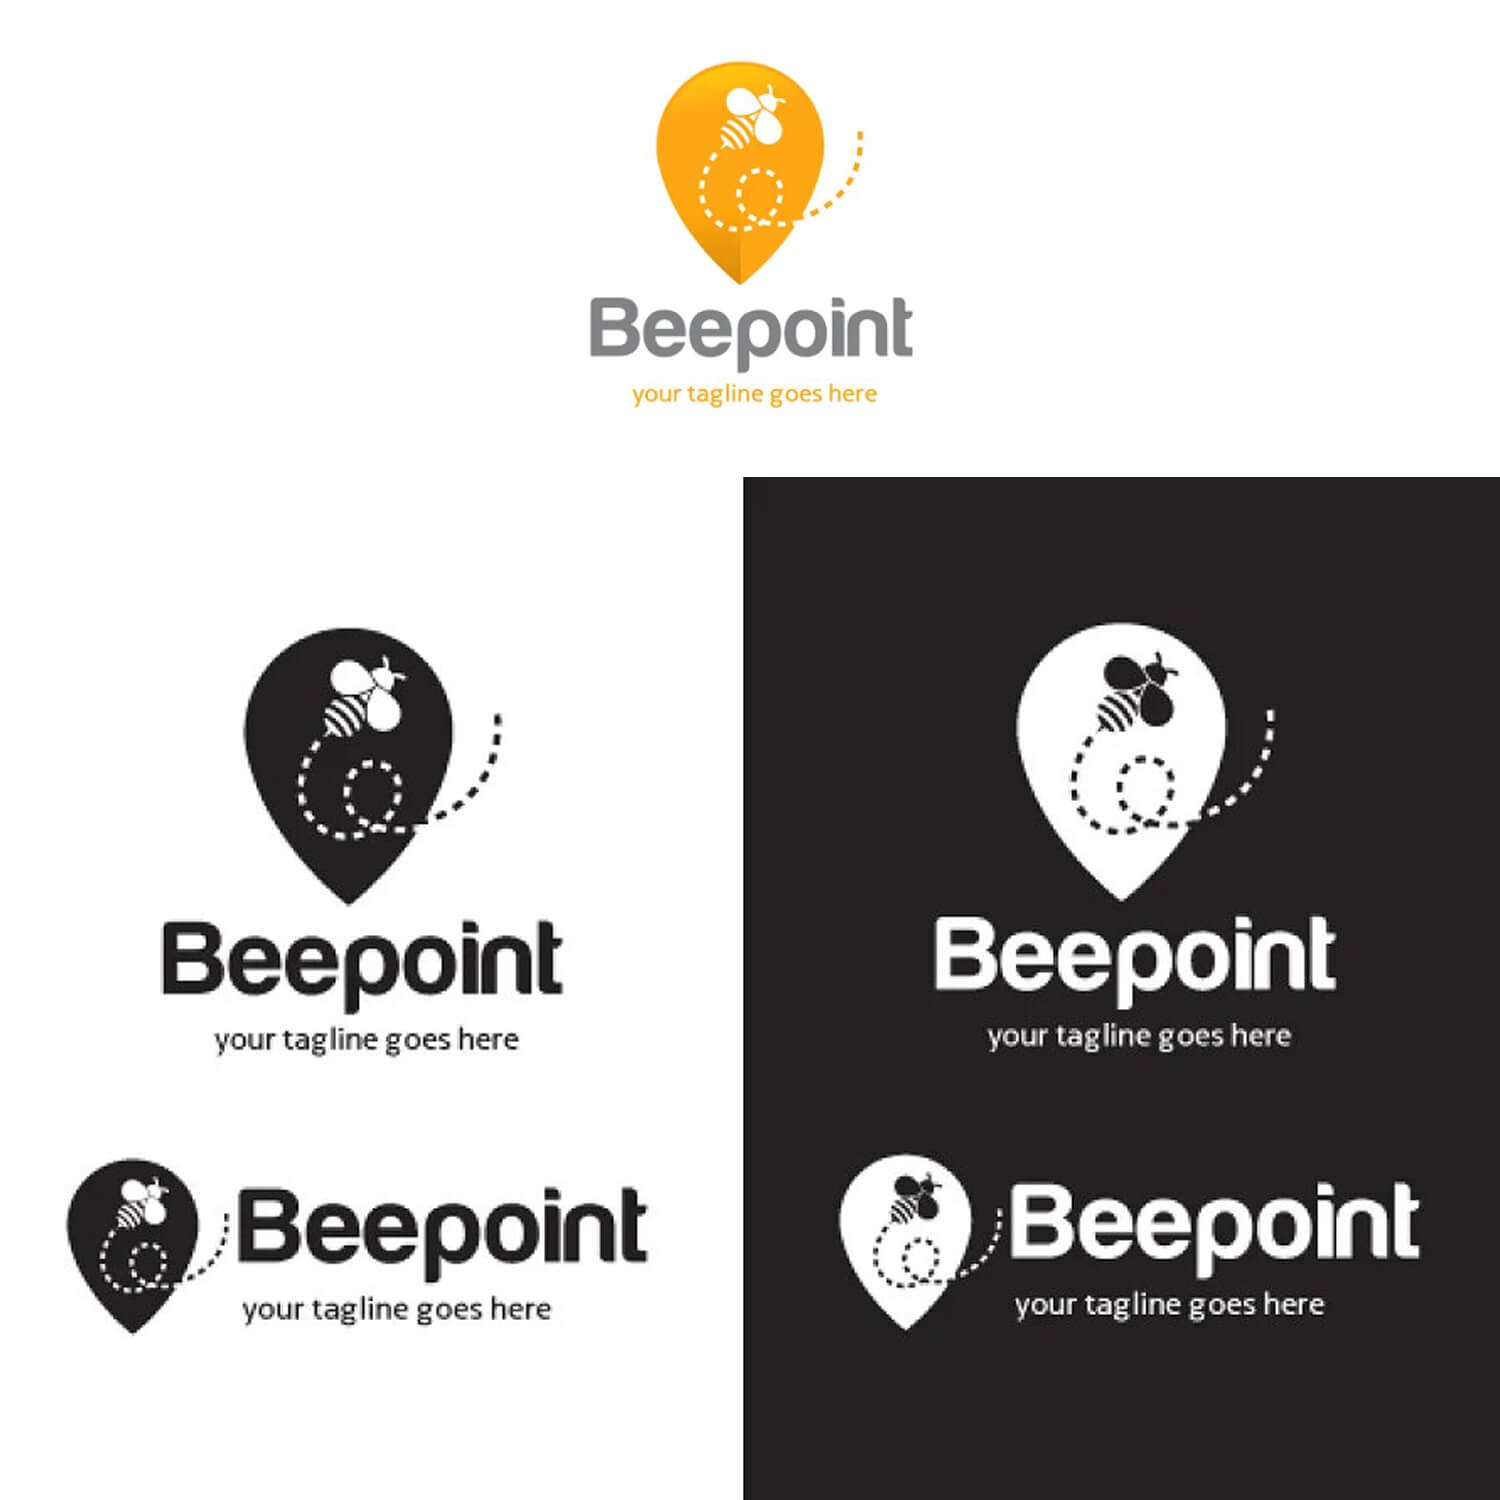 Beepoint company logo with a black bee on a white background and vice versa.